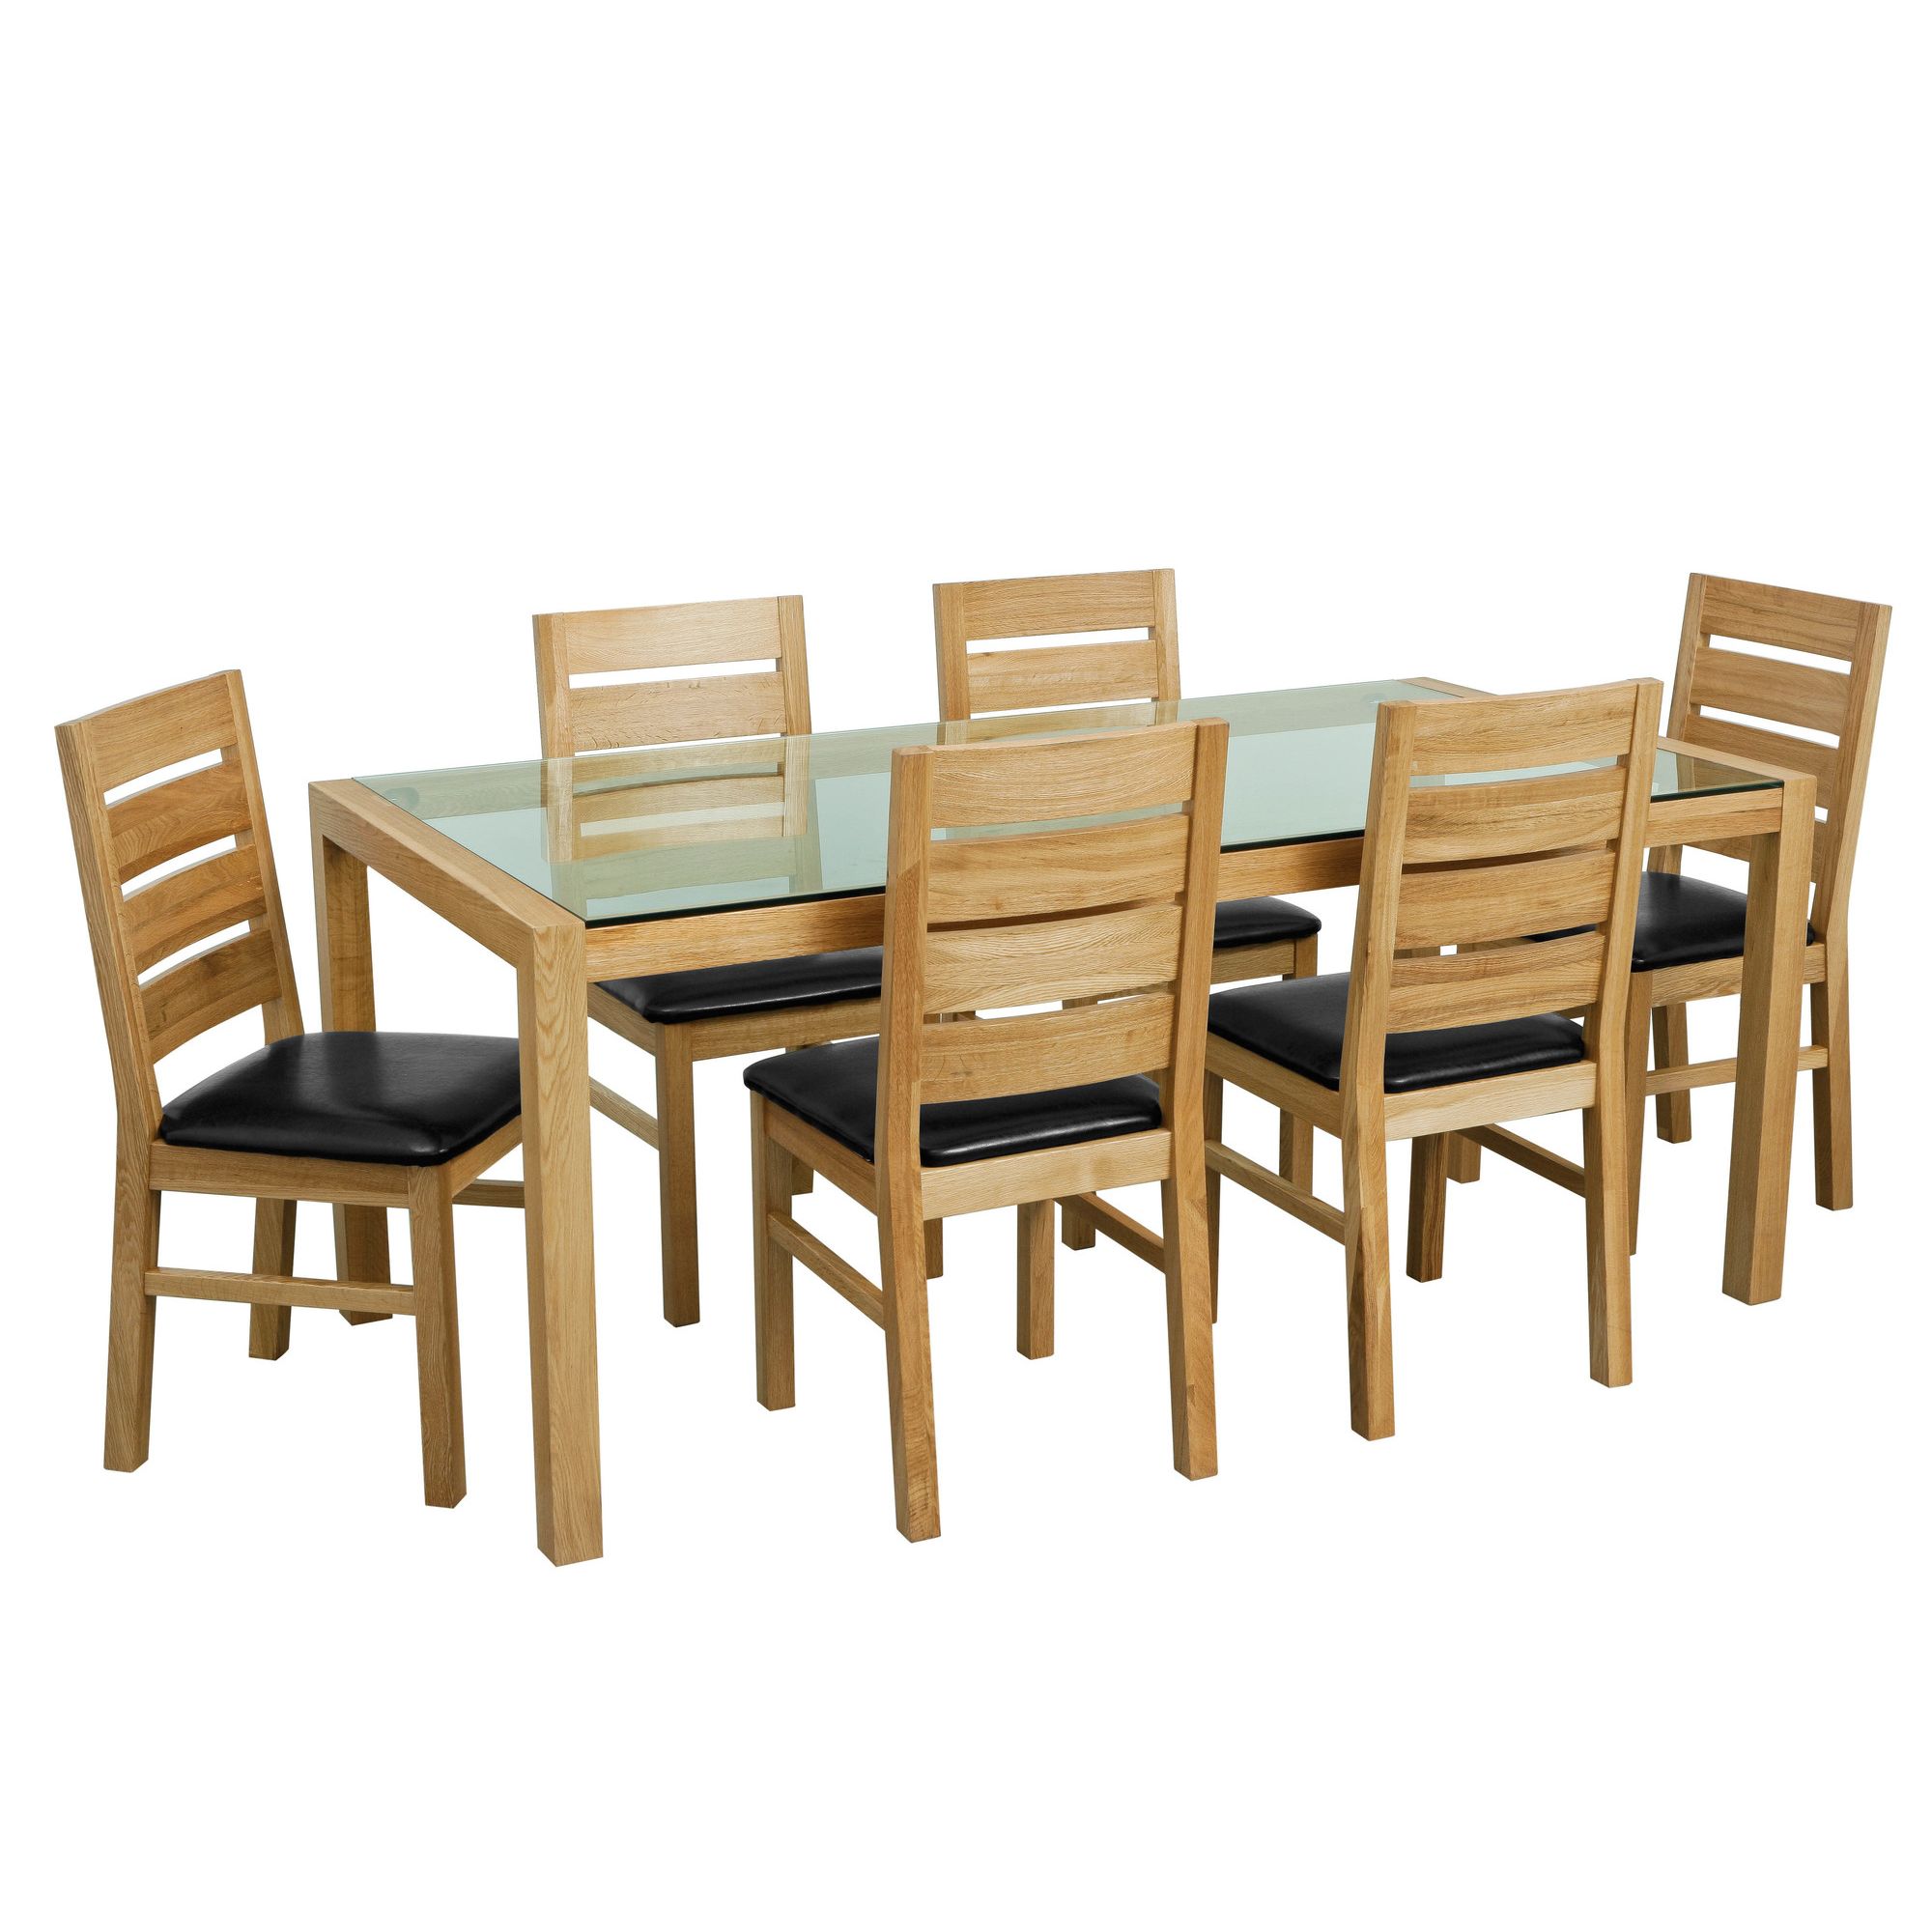 Premier Housewares 7 Piece Dining Set with Glass Top at Tesco Direct